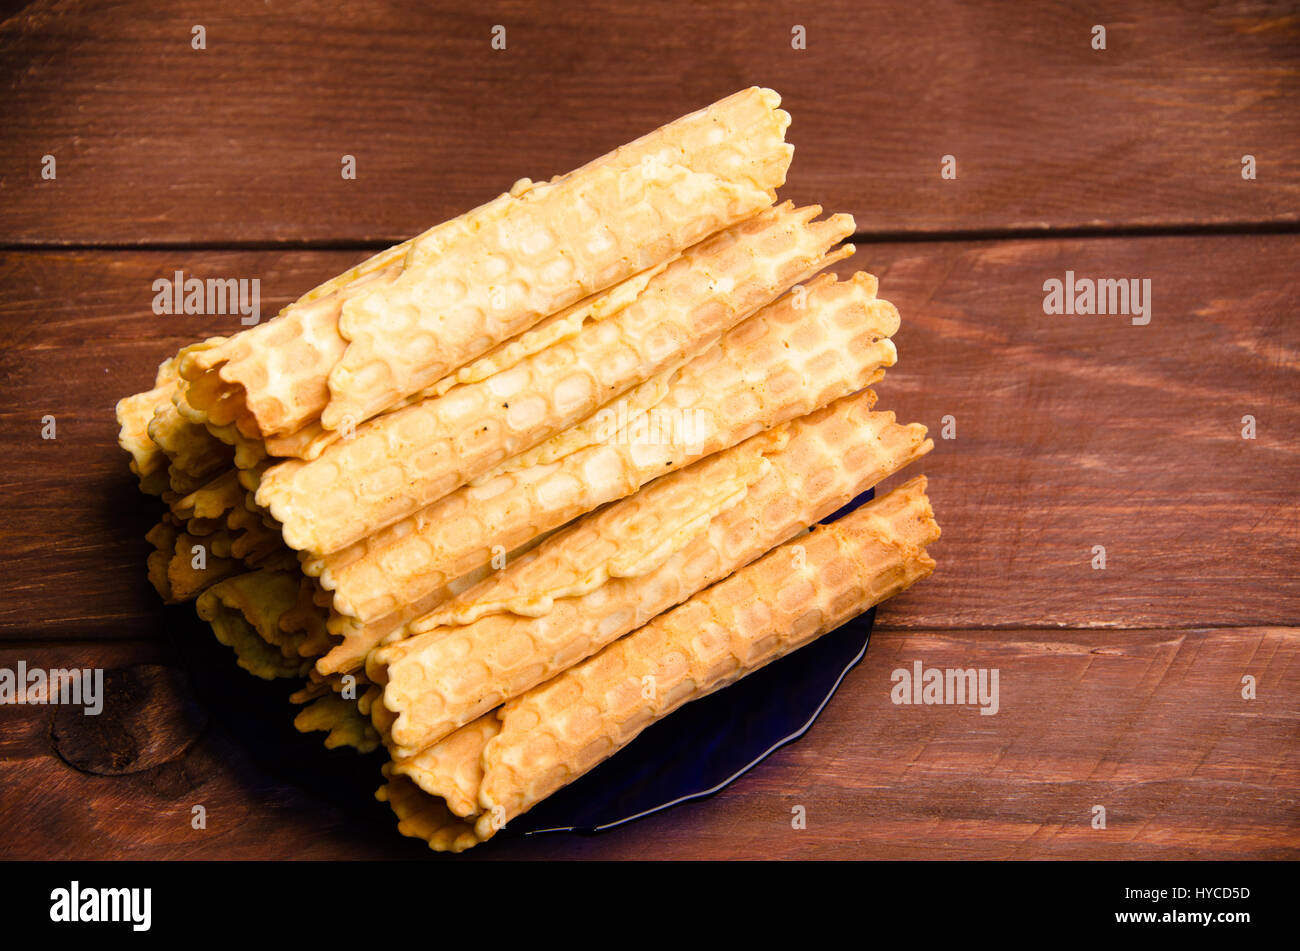 waffles on wooden boards. delicious waffles. fresh pastries Stock Photo